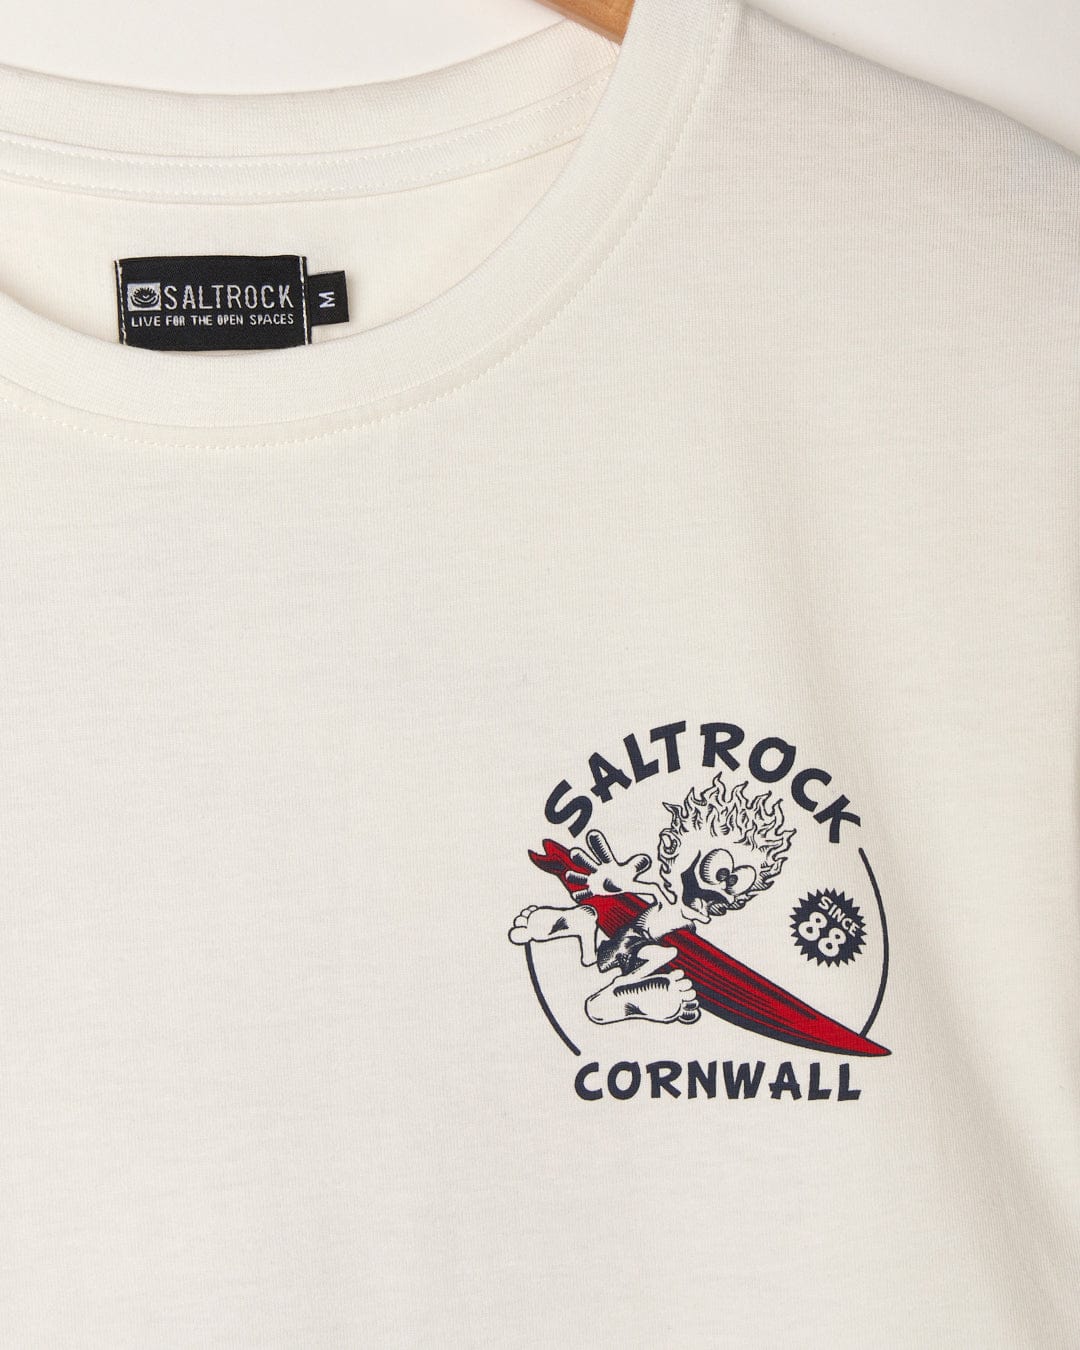 A white graphic t-shirt featuring the branding of Saltrock and the location name Cornwall. The Wave Rider Cornwall - Mens Short Sleeve - White by Saltrock.